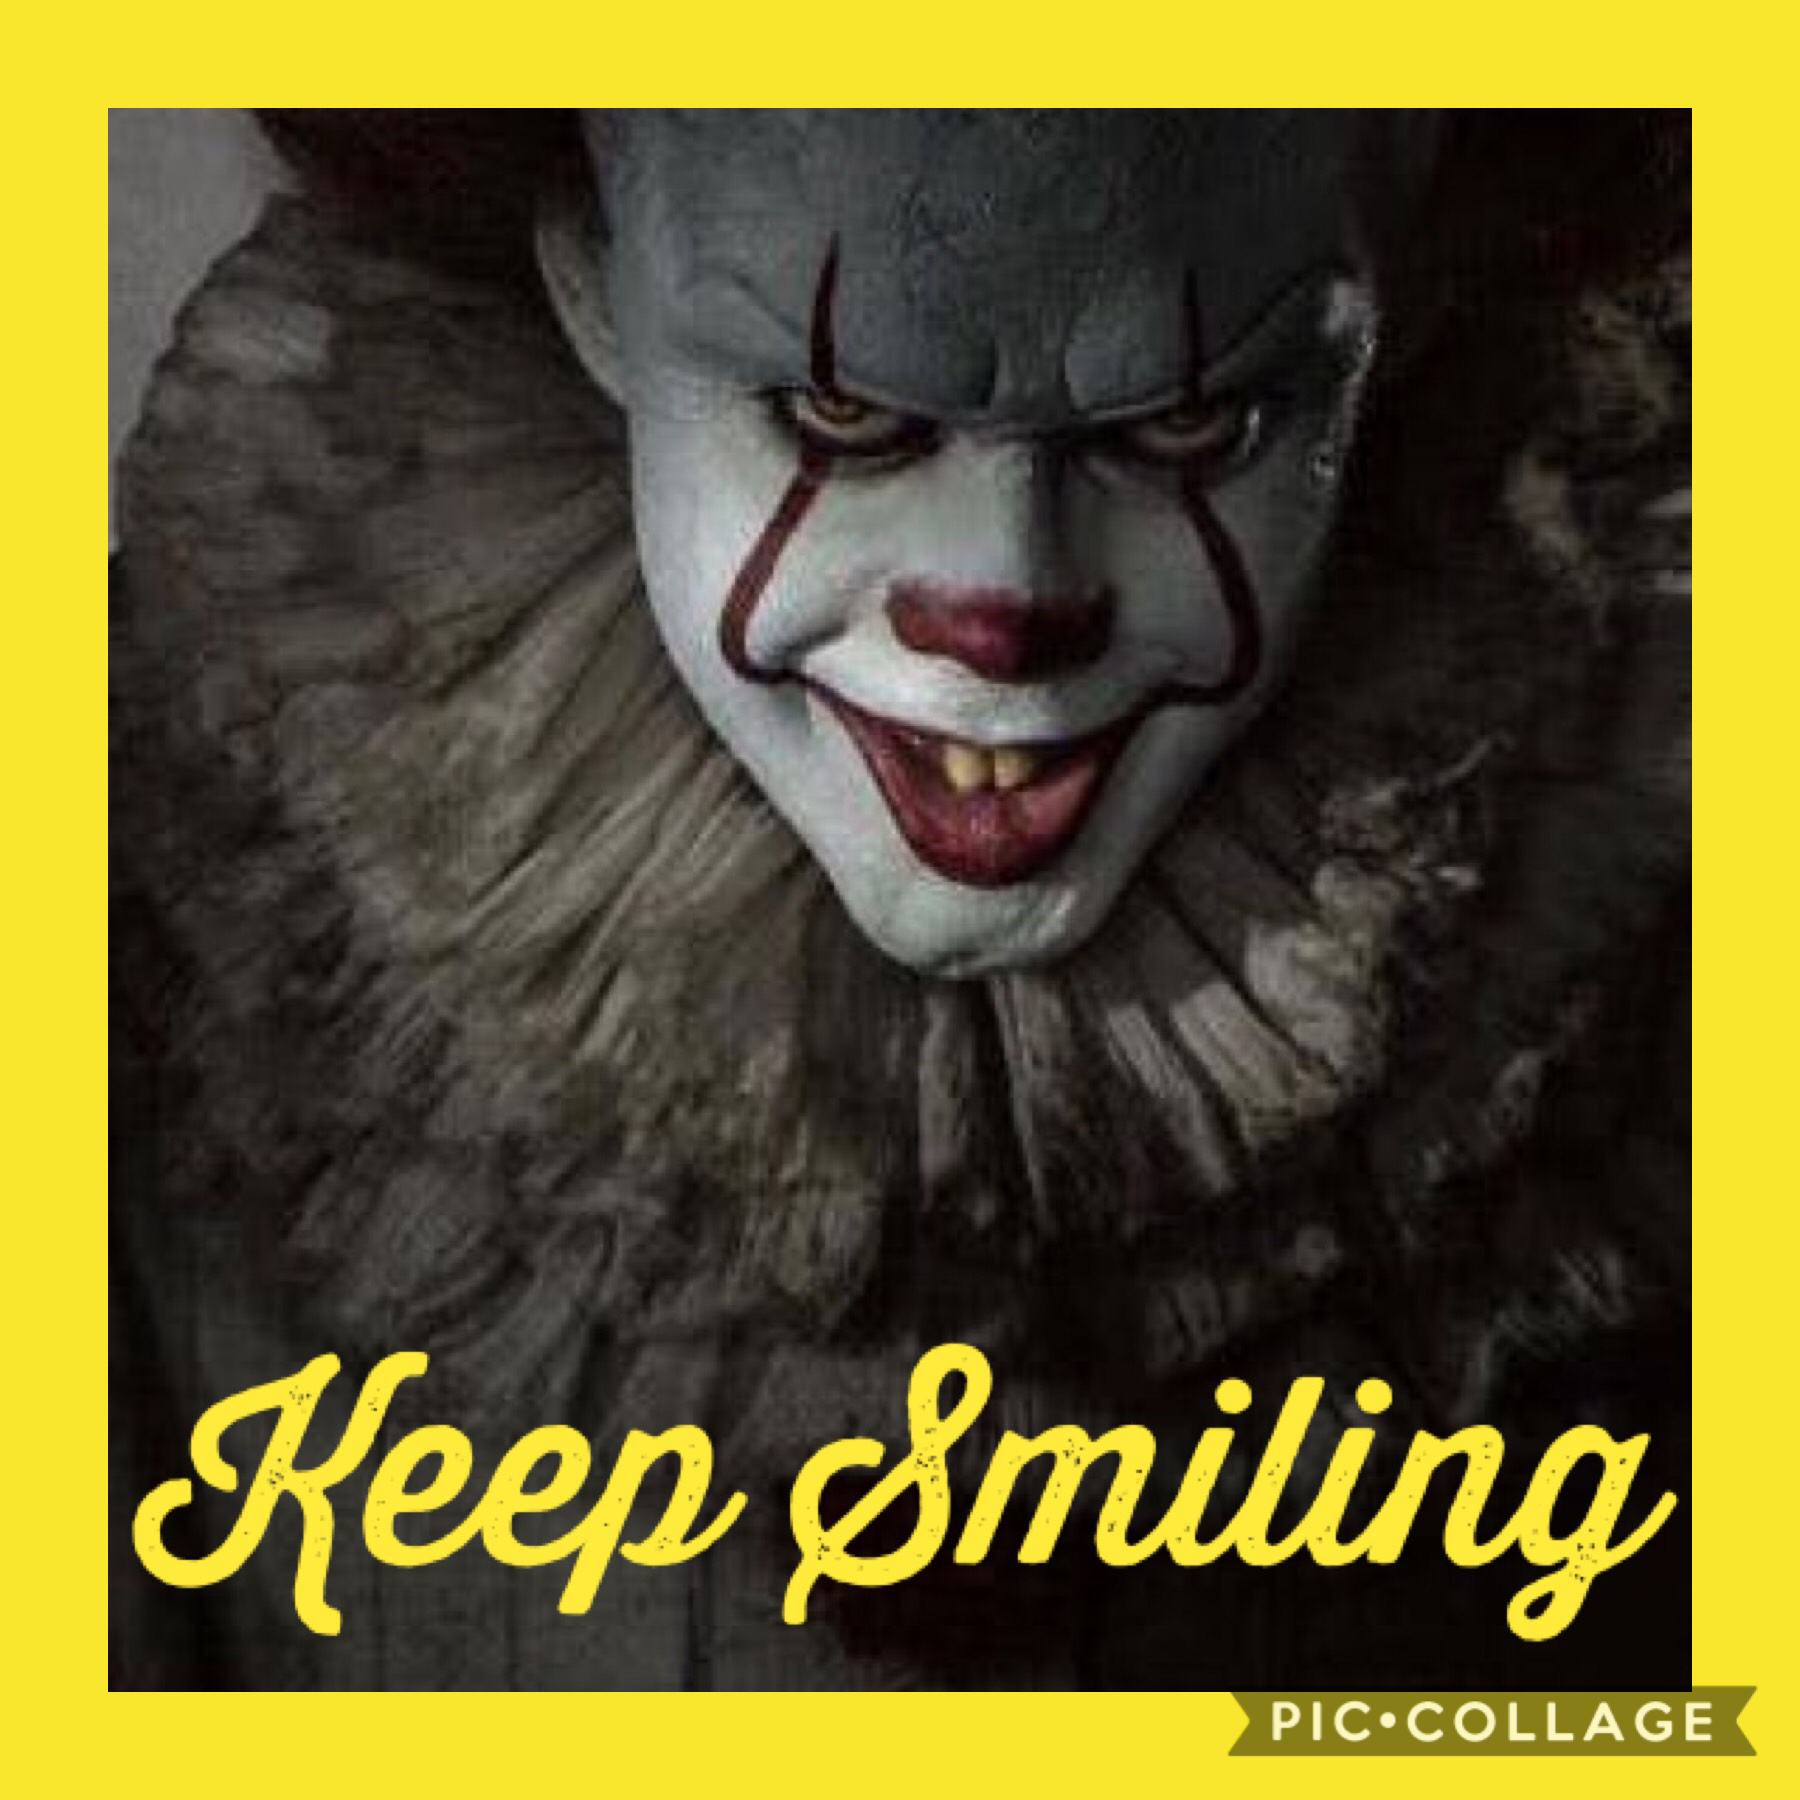 Keep smiling penny wise 